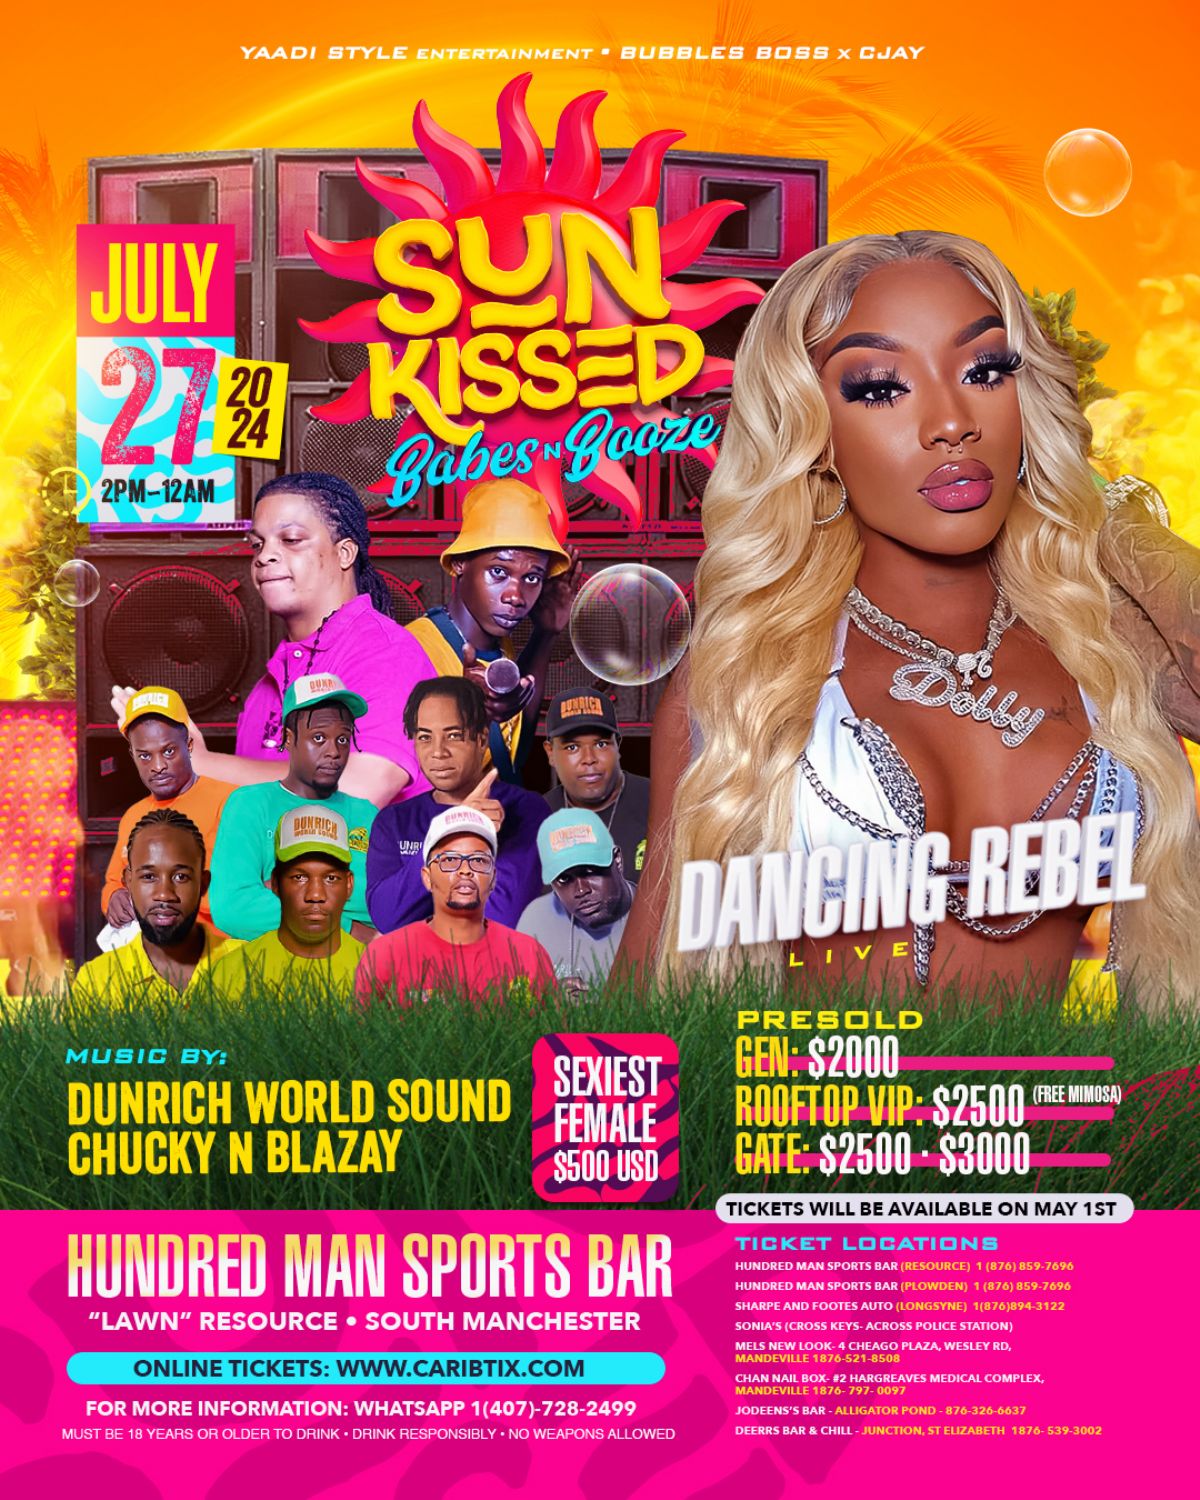 SUNKISSED Babes N Booze "Dancing REBEL" Live! Event Poster